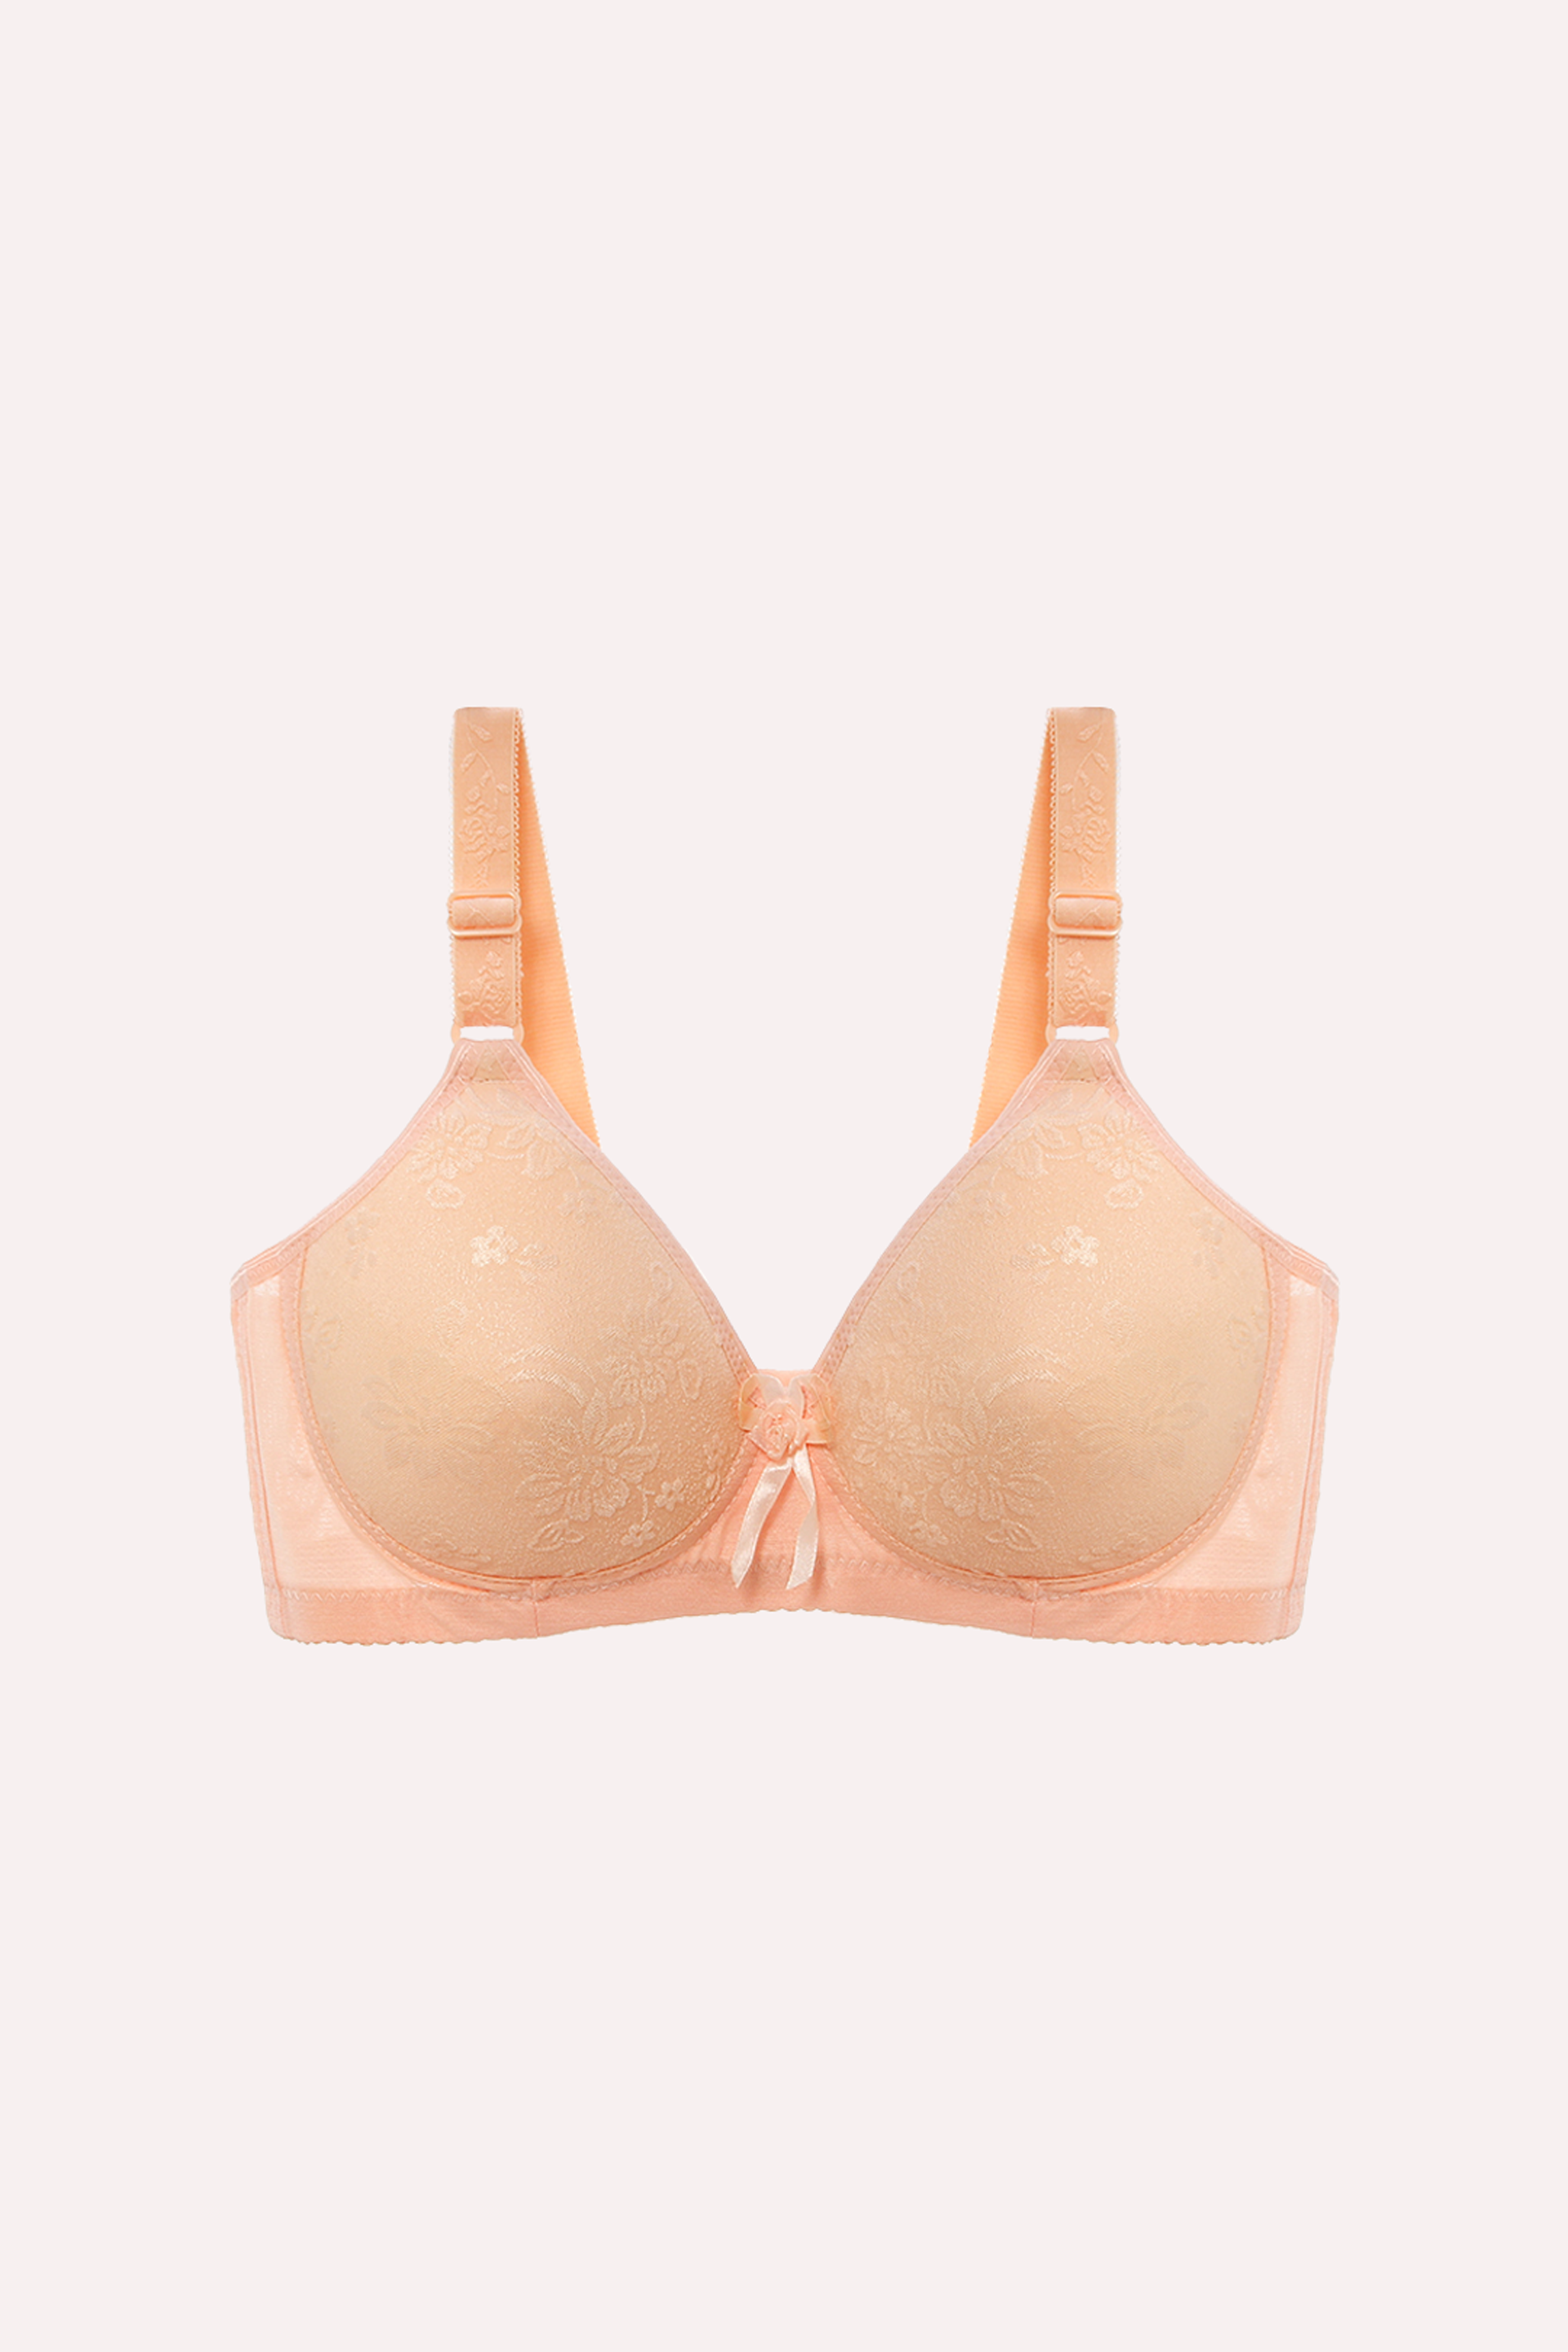 Buy Imported Padded Bra for Women & Girls at Lowest Price in Pakistan